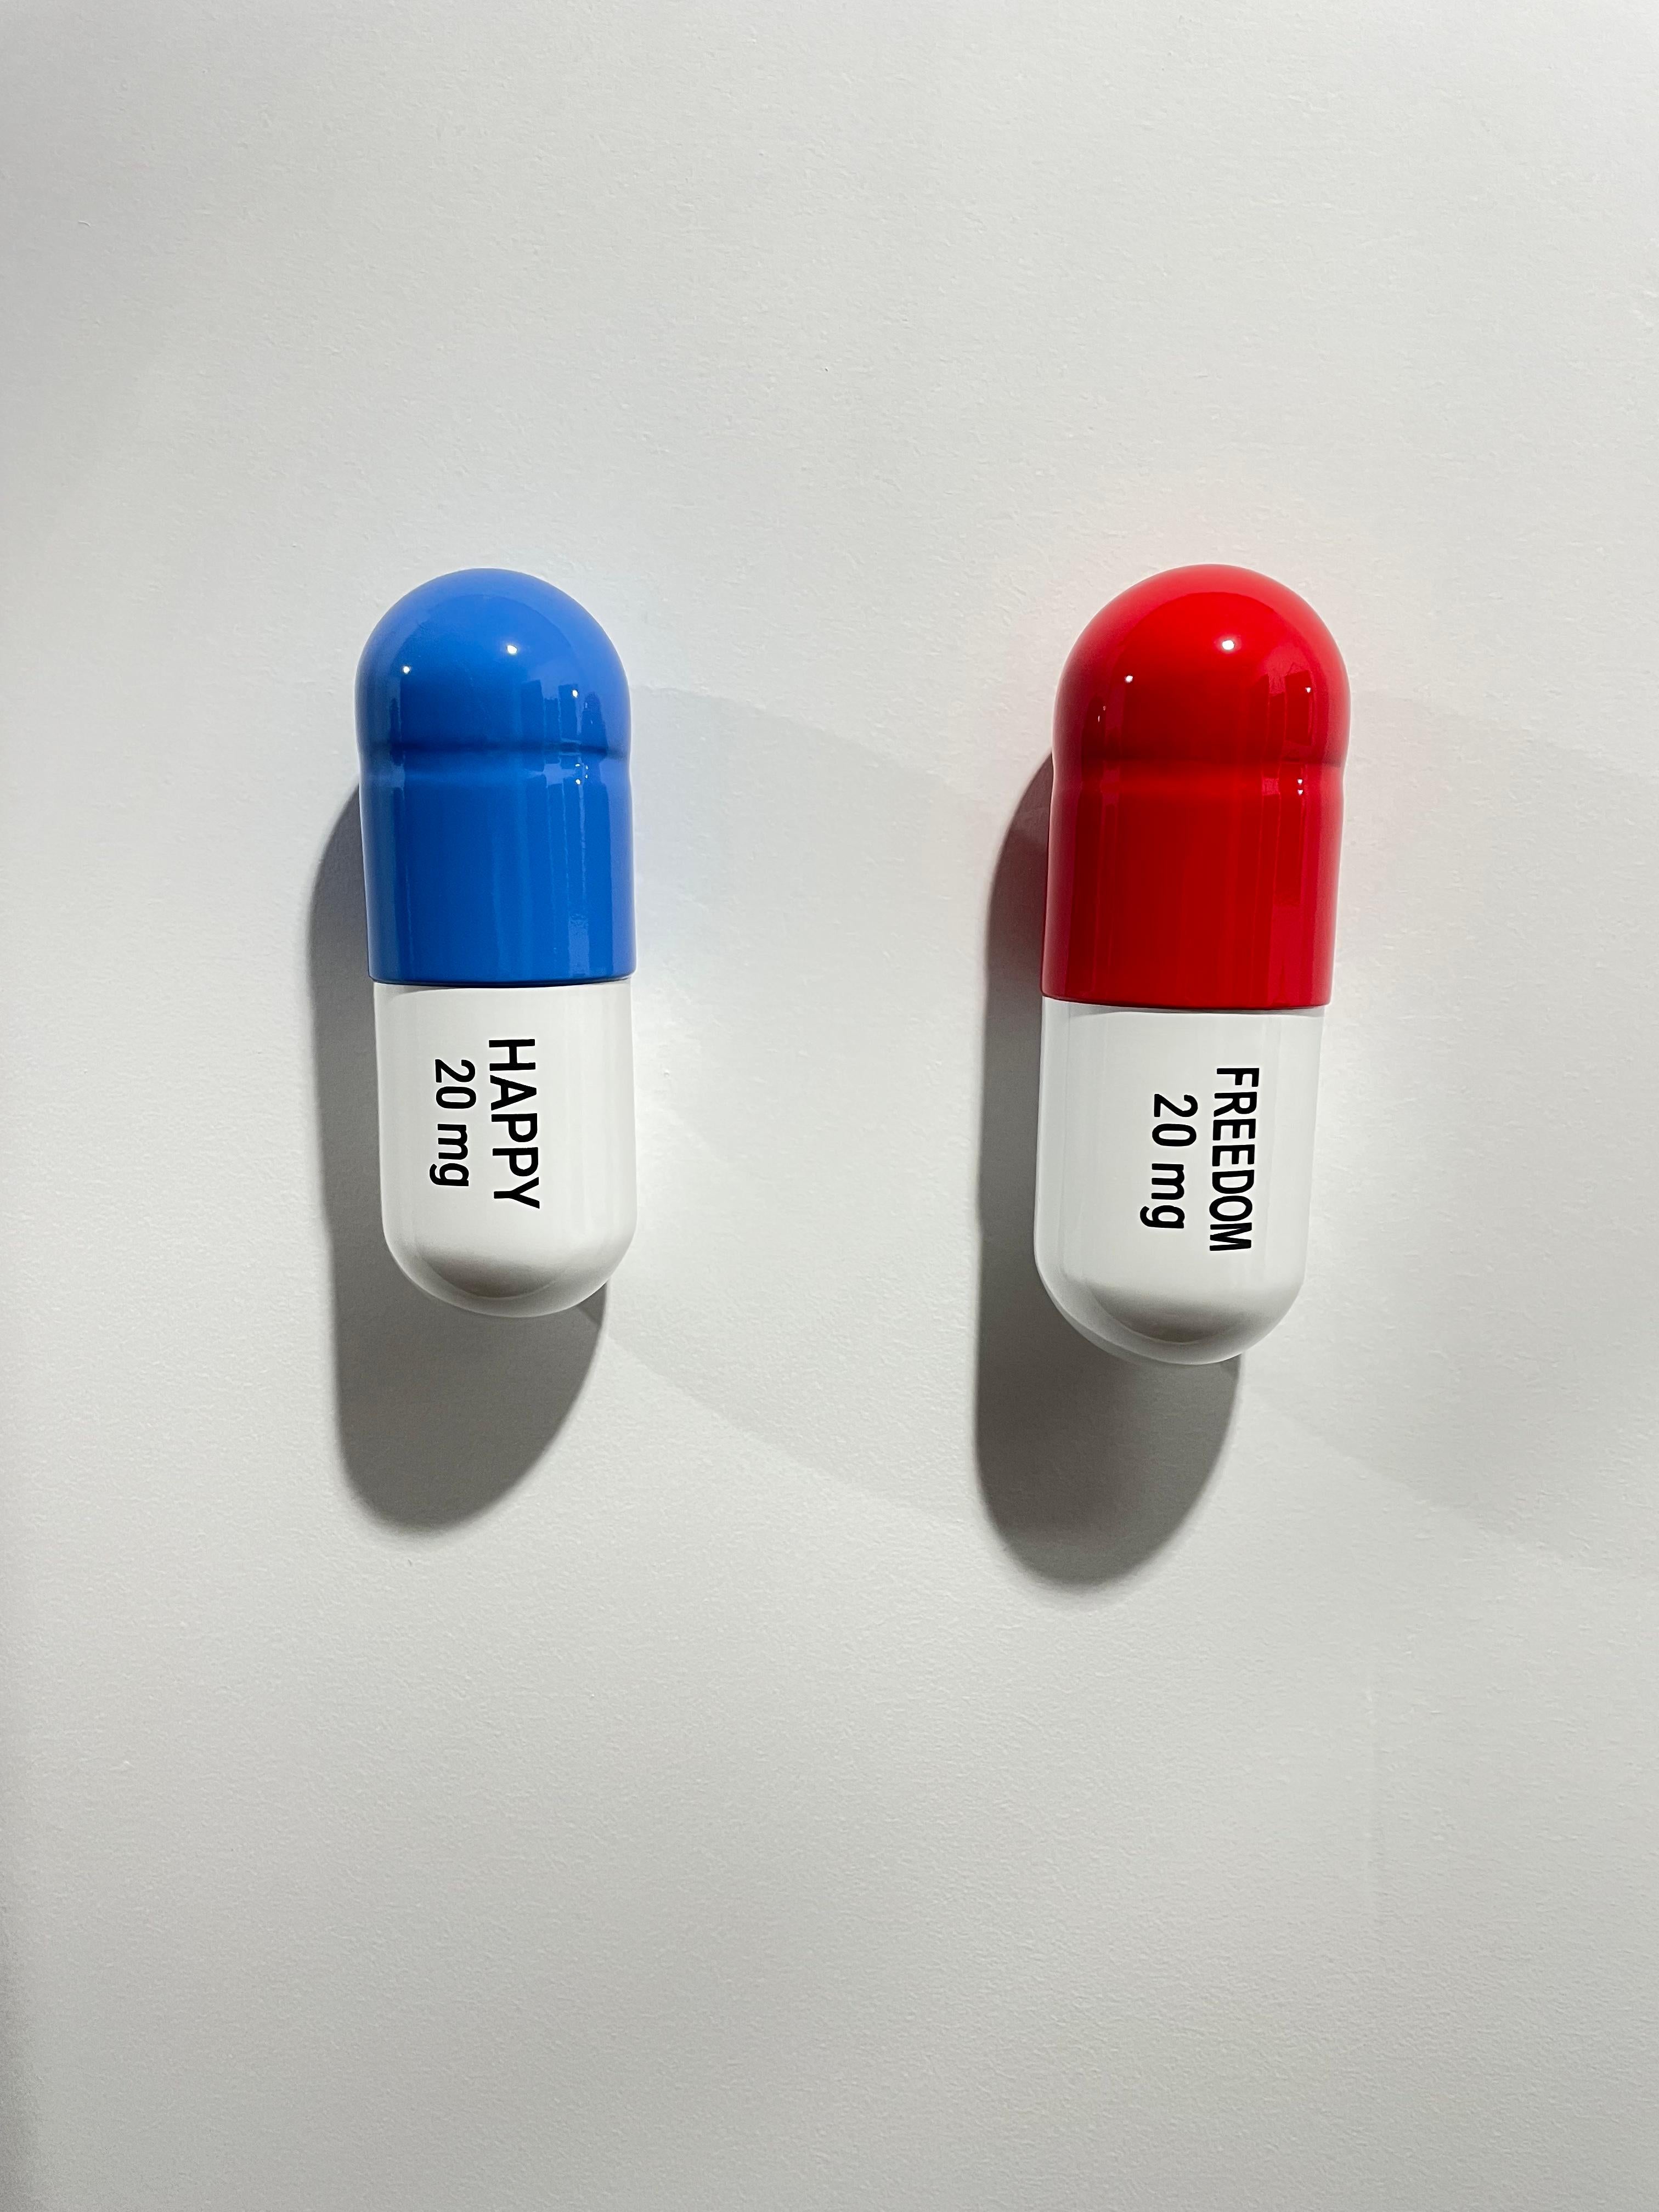 Tal Nehoray Still-Life Sculpture - 20 ML Happy freedom pill Combo (red, blue, white) - figurative sculpture